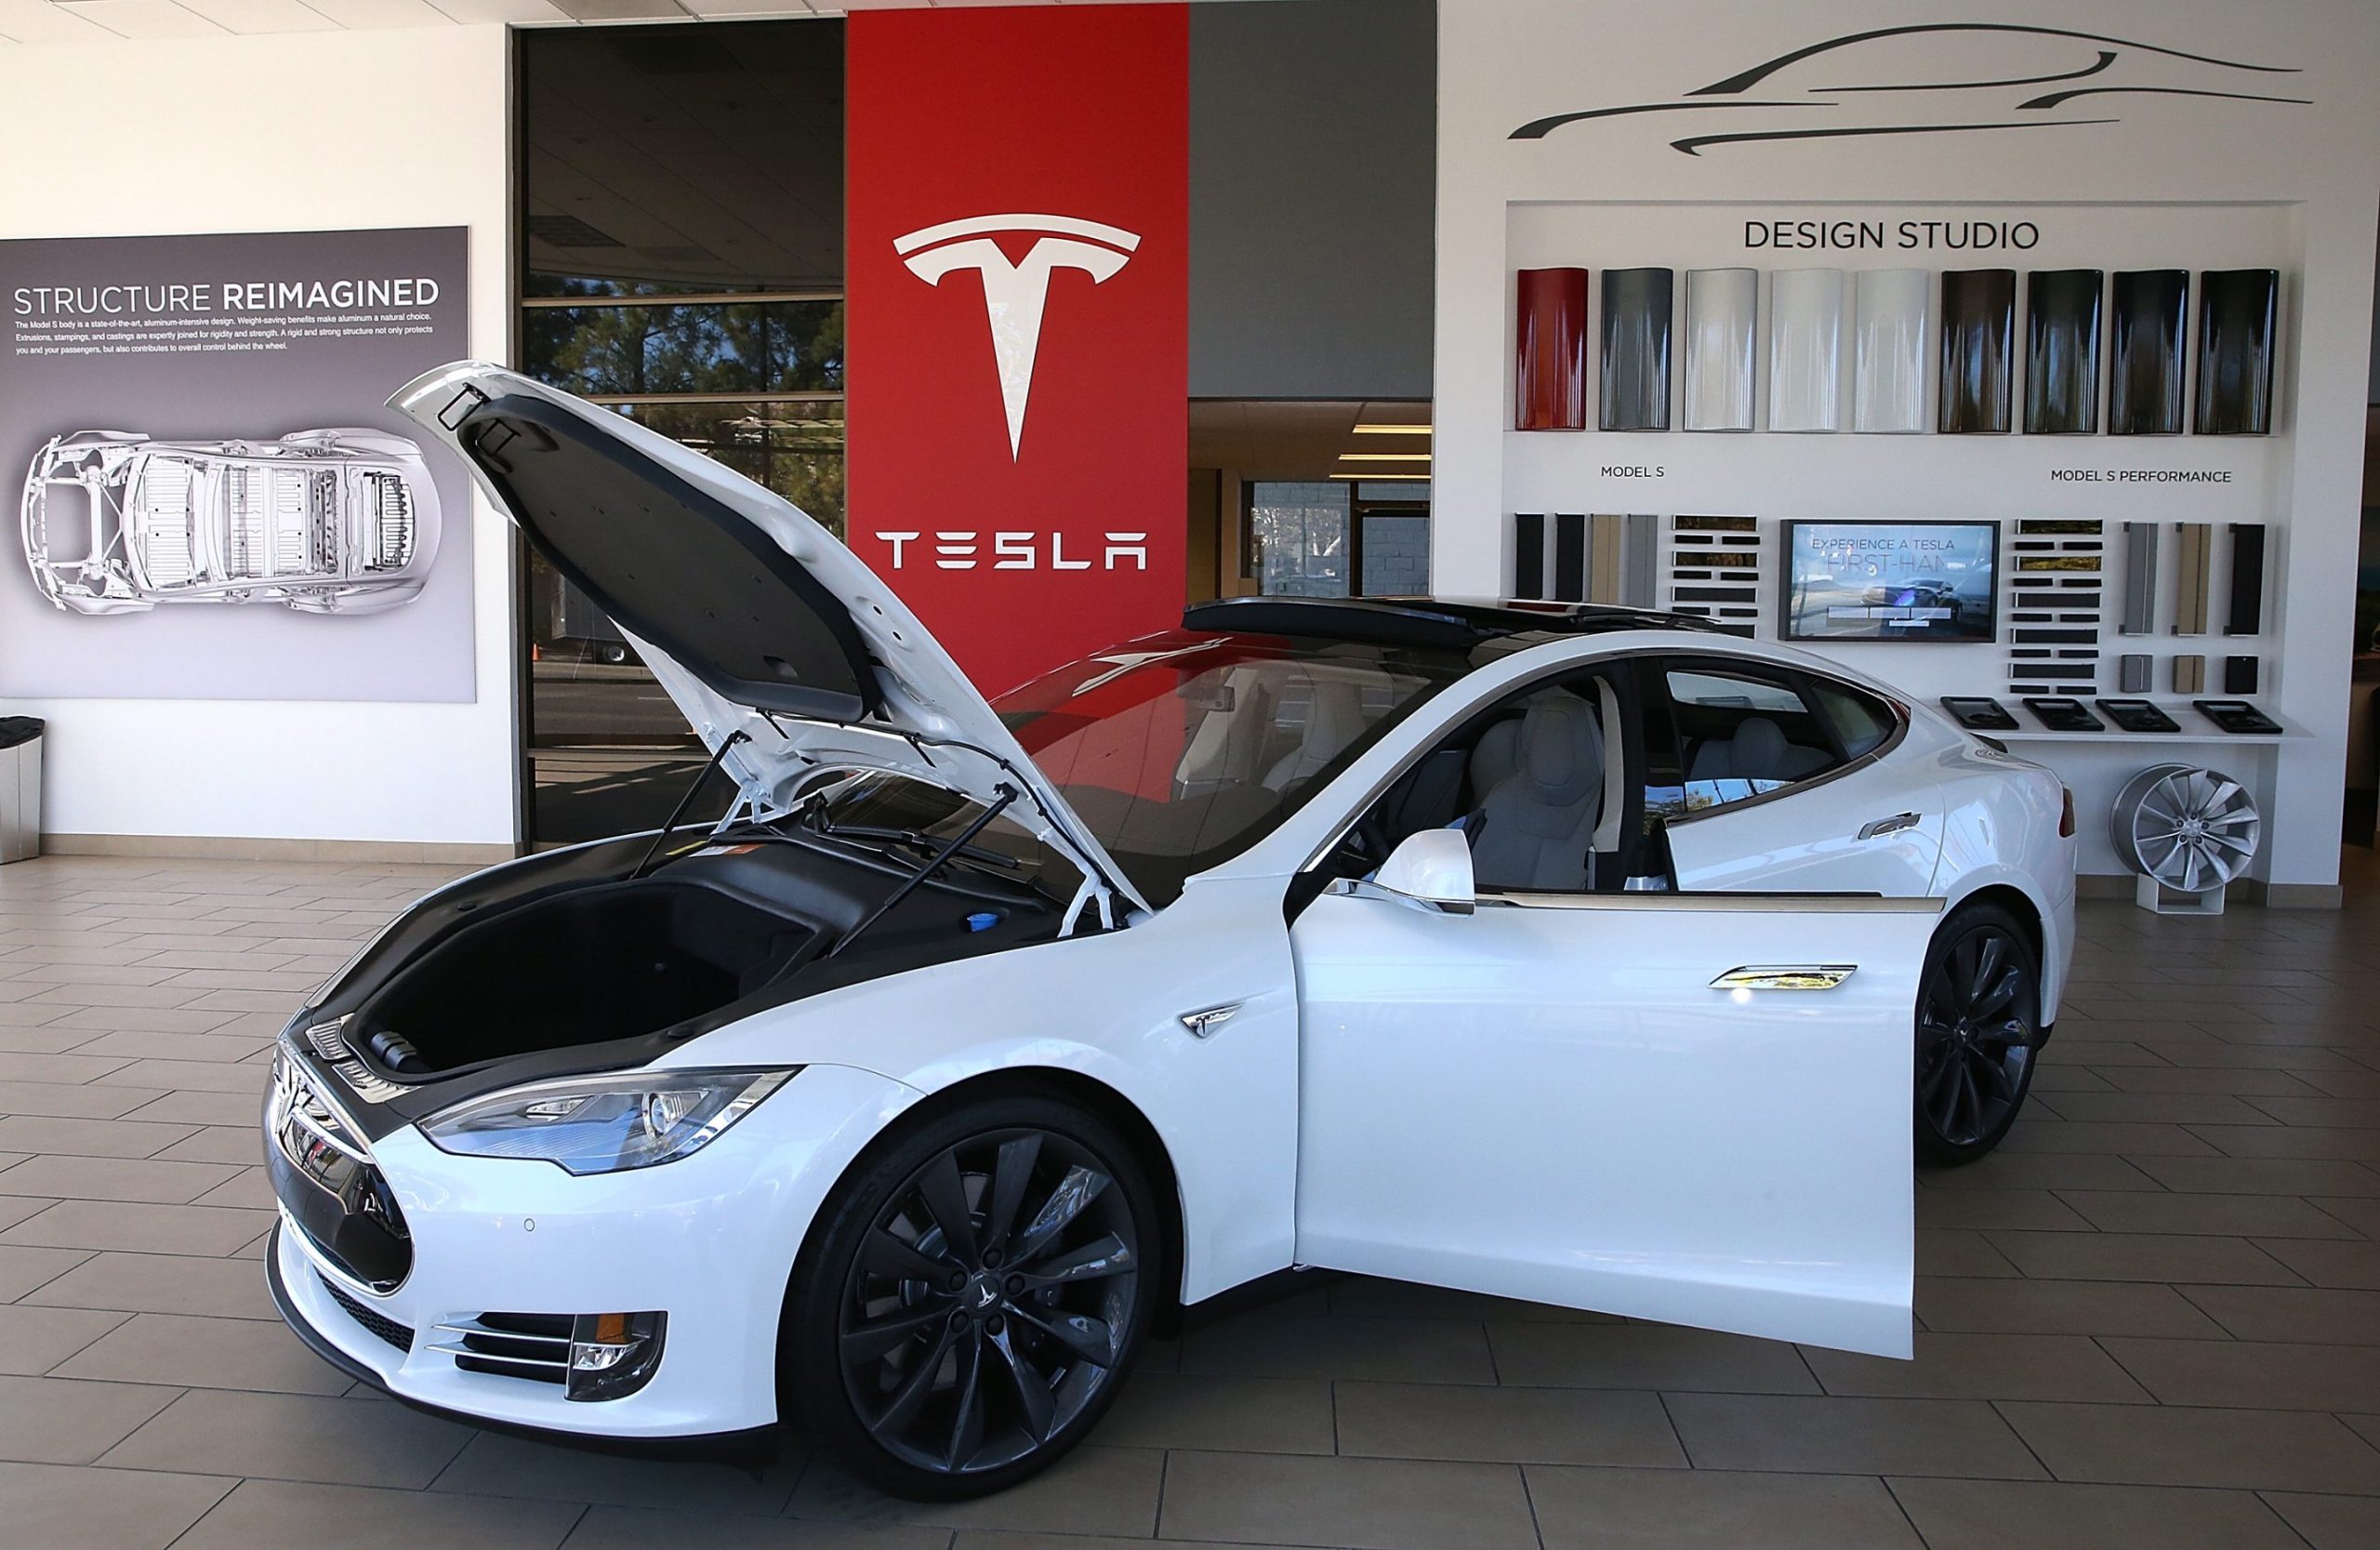 Federal judge cuts Tesla racism case award to $15 million from $137 million